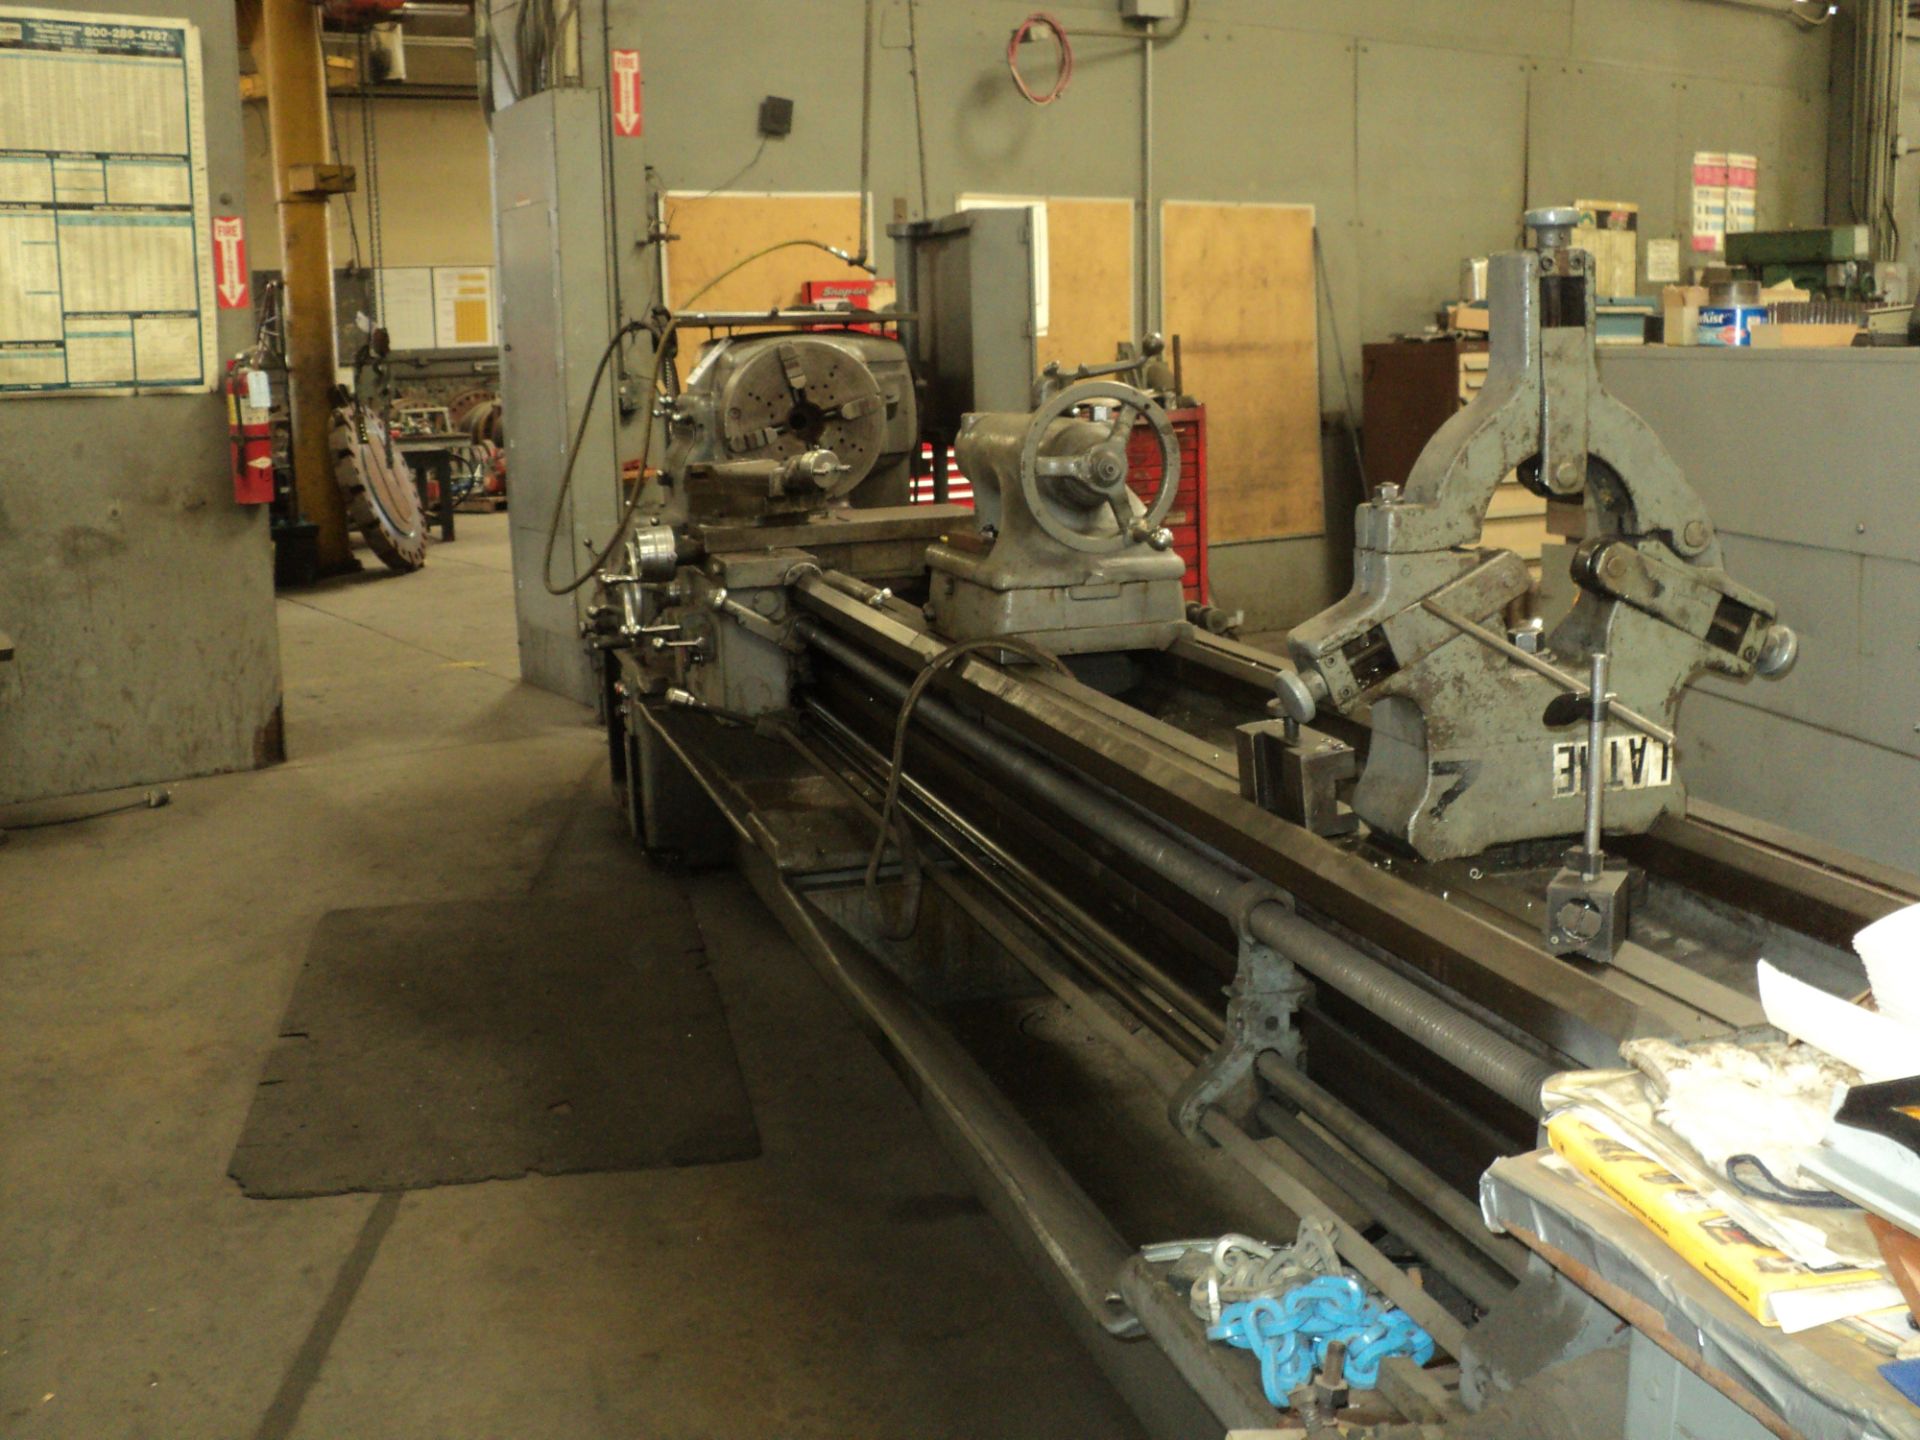 MONARCH ENGINE LATHE, 20" x 120" CCS, 12" 3 JAW CHUCK, TAILSTOCK, CROSS SLIDE, STEADY REST, TRACER - Image 2 of 5